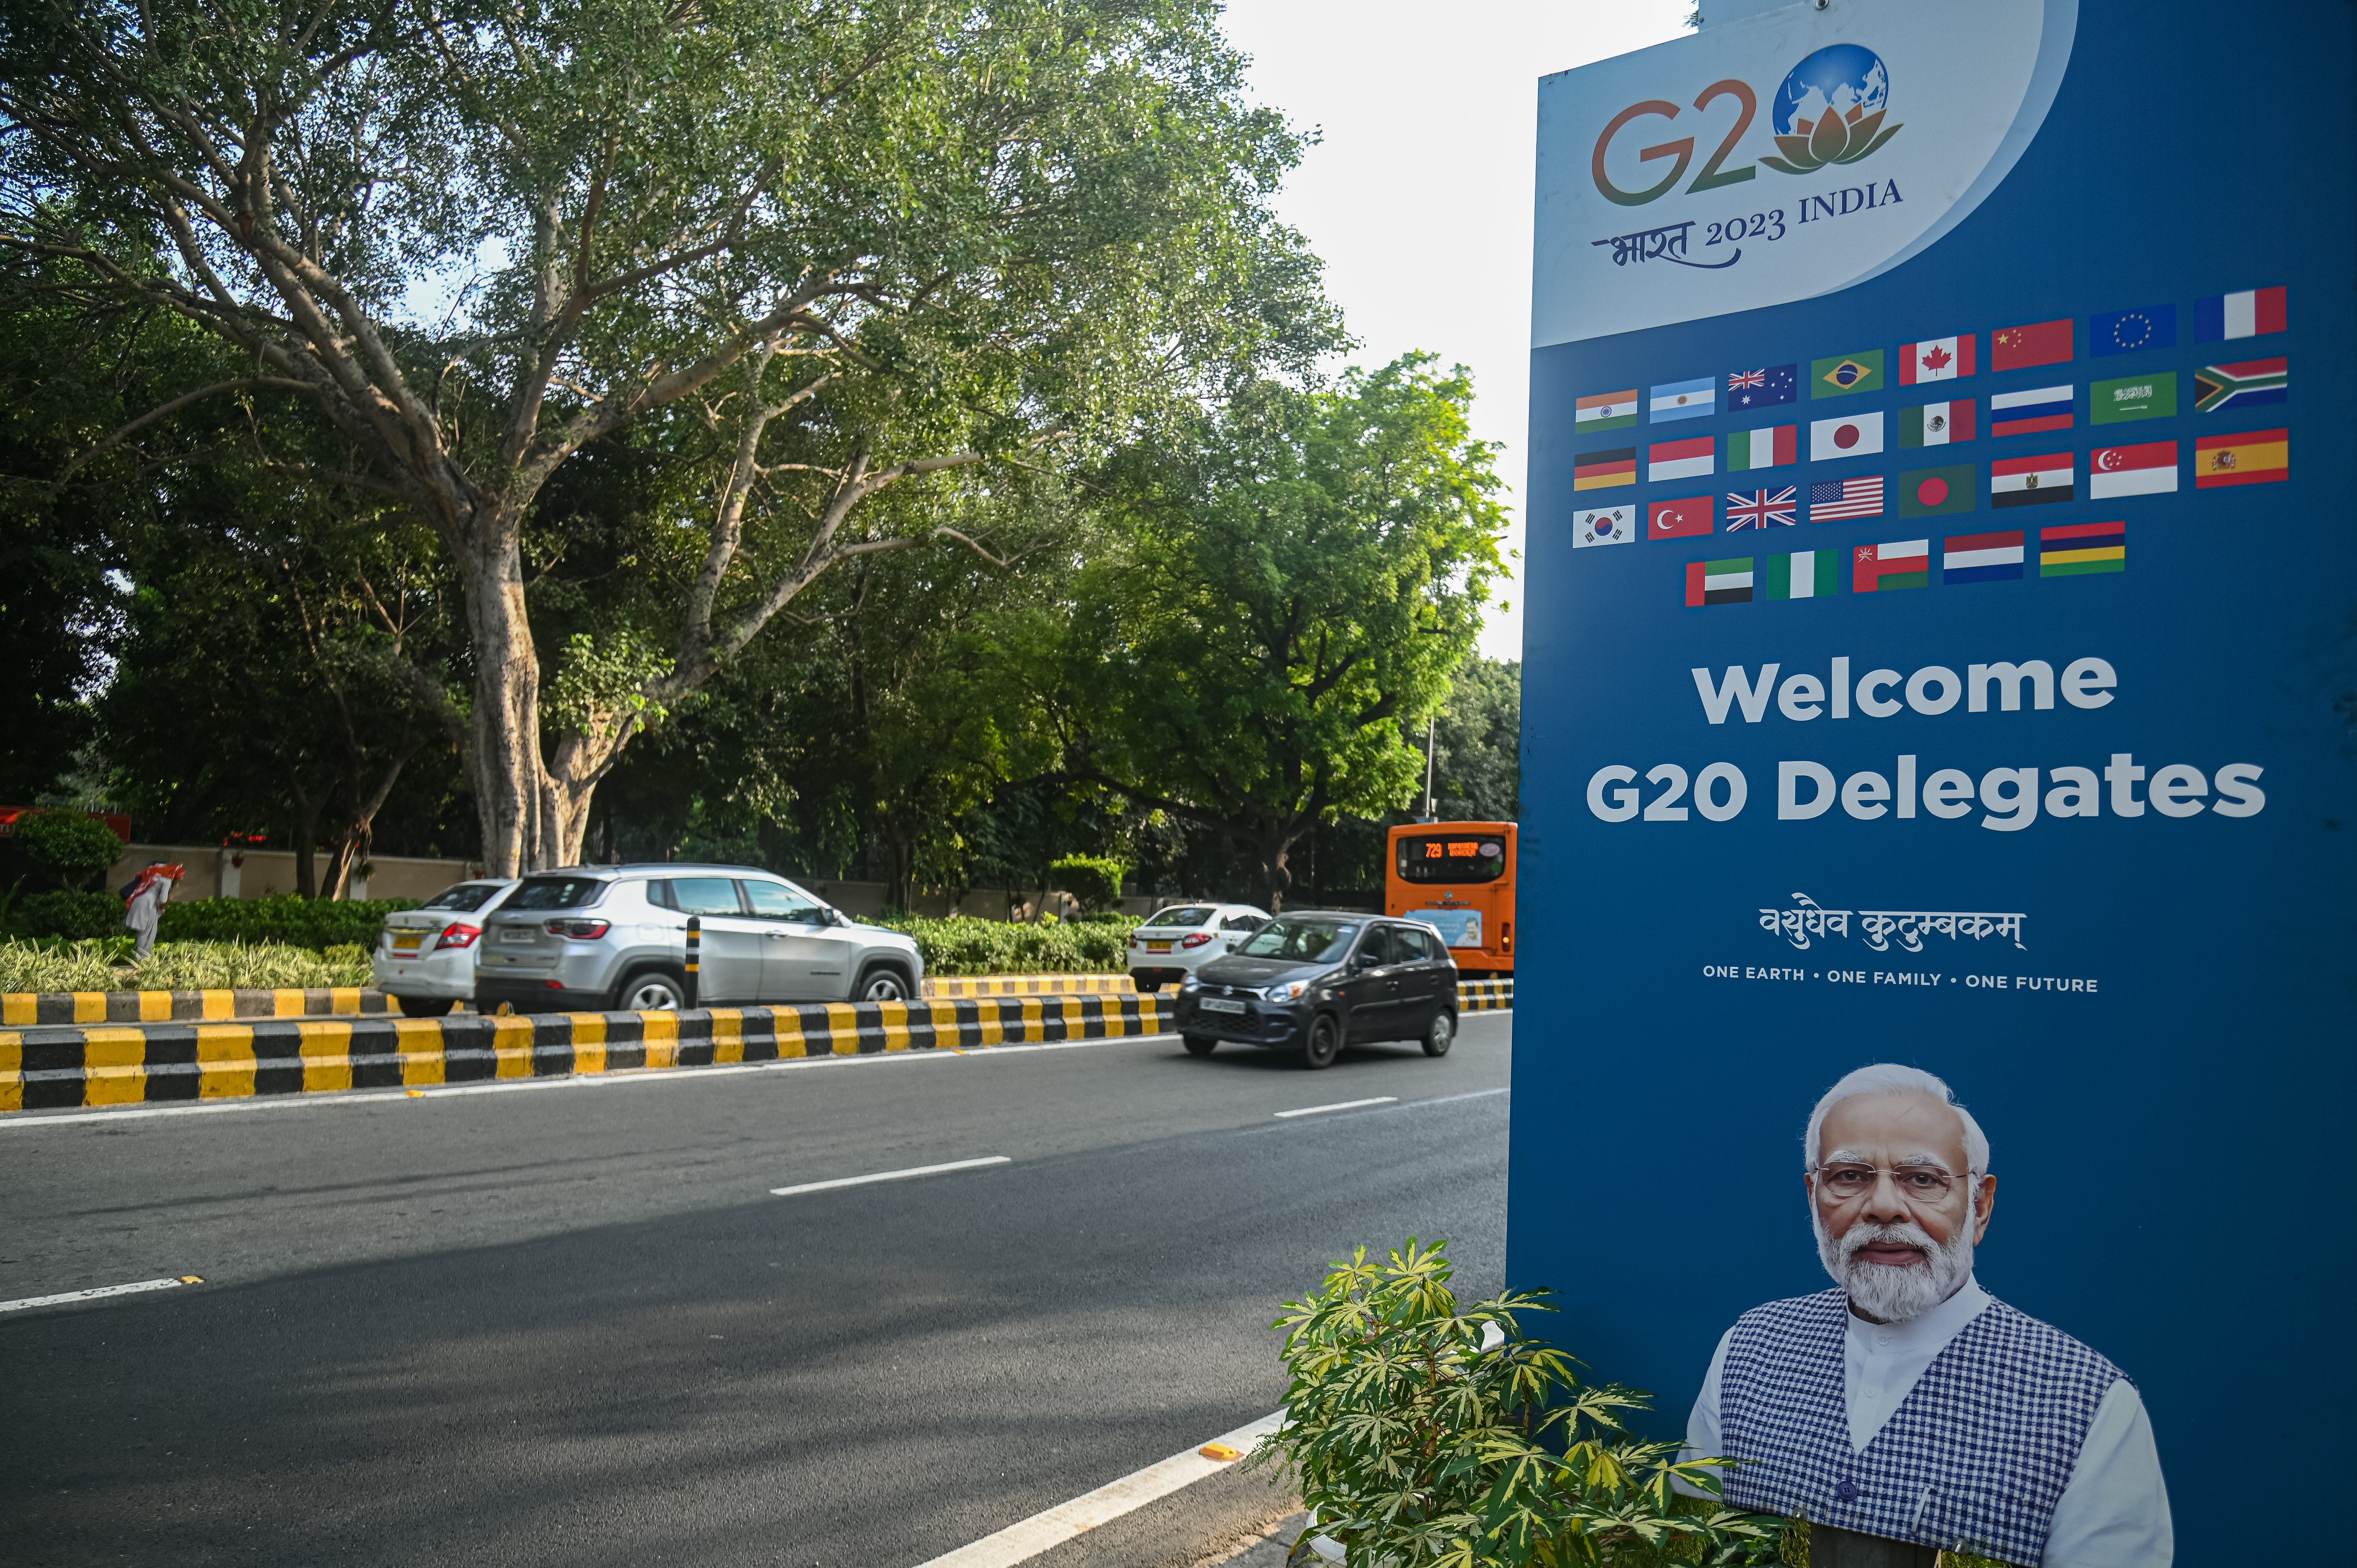 The G20 Summit Is an Opportunity for Modi and a Test of India’s Global Leadership